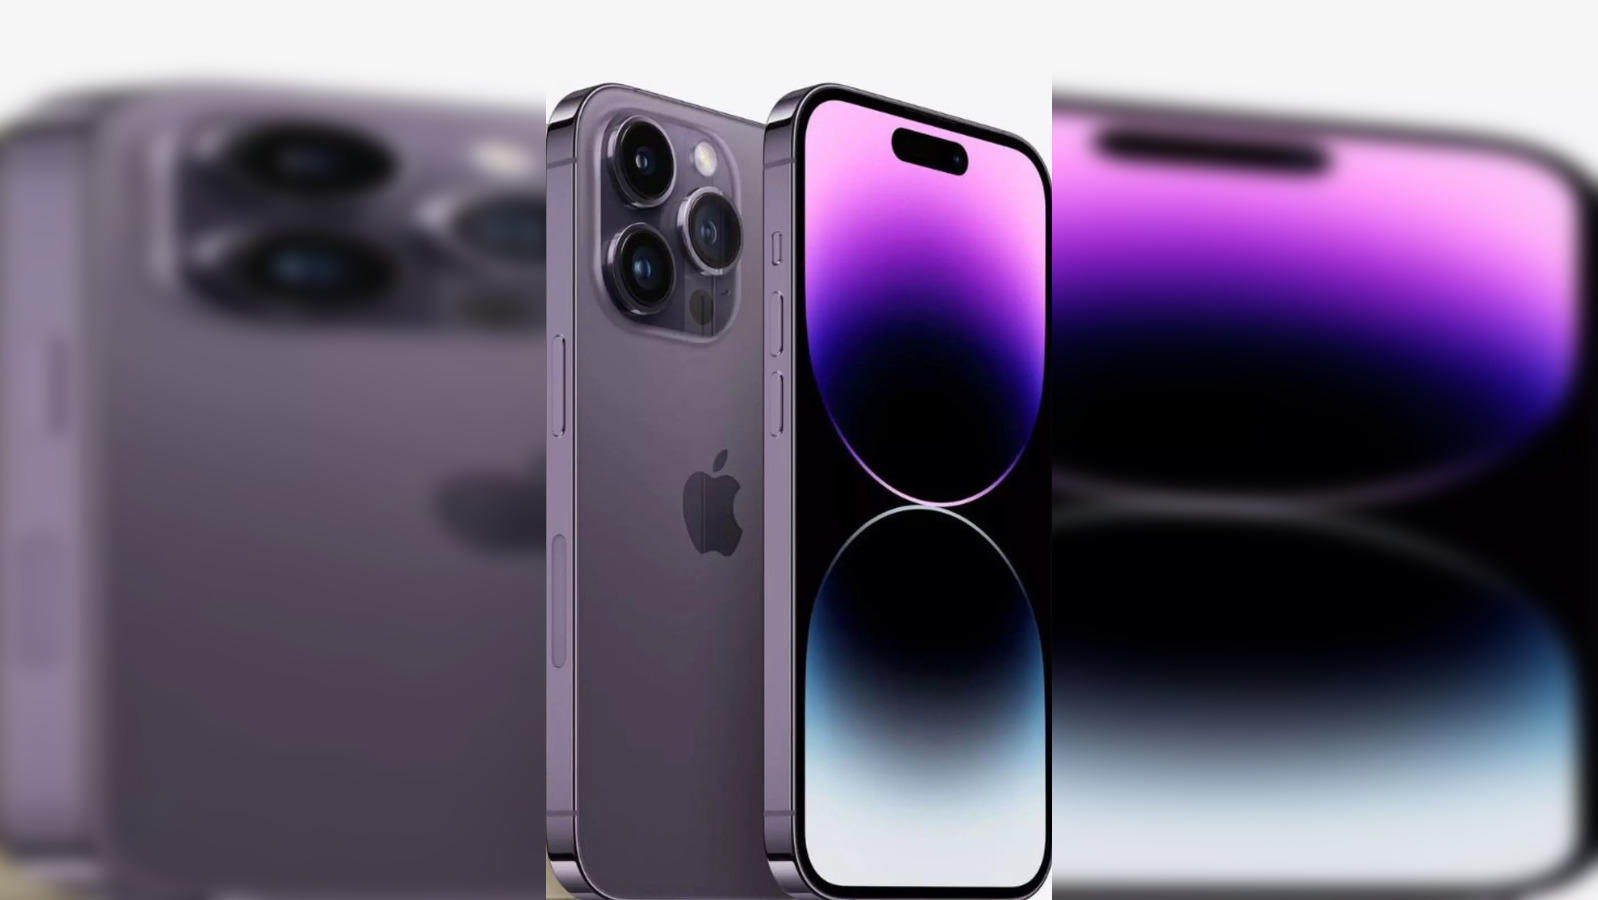 Apple discontinues iPhone 12 Pro, iPhone 12 Pro Max after iPhone 13 launch